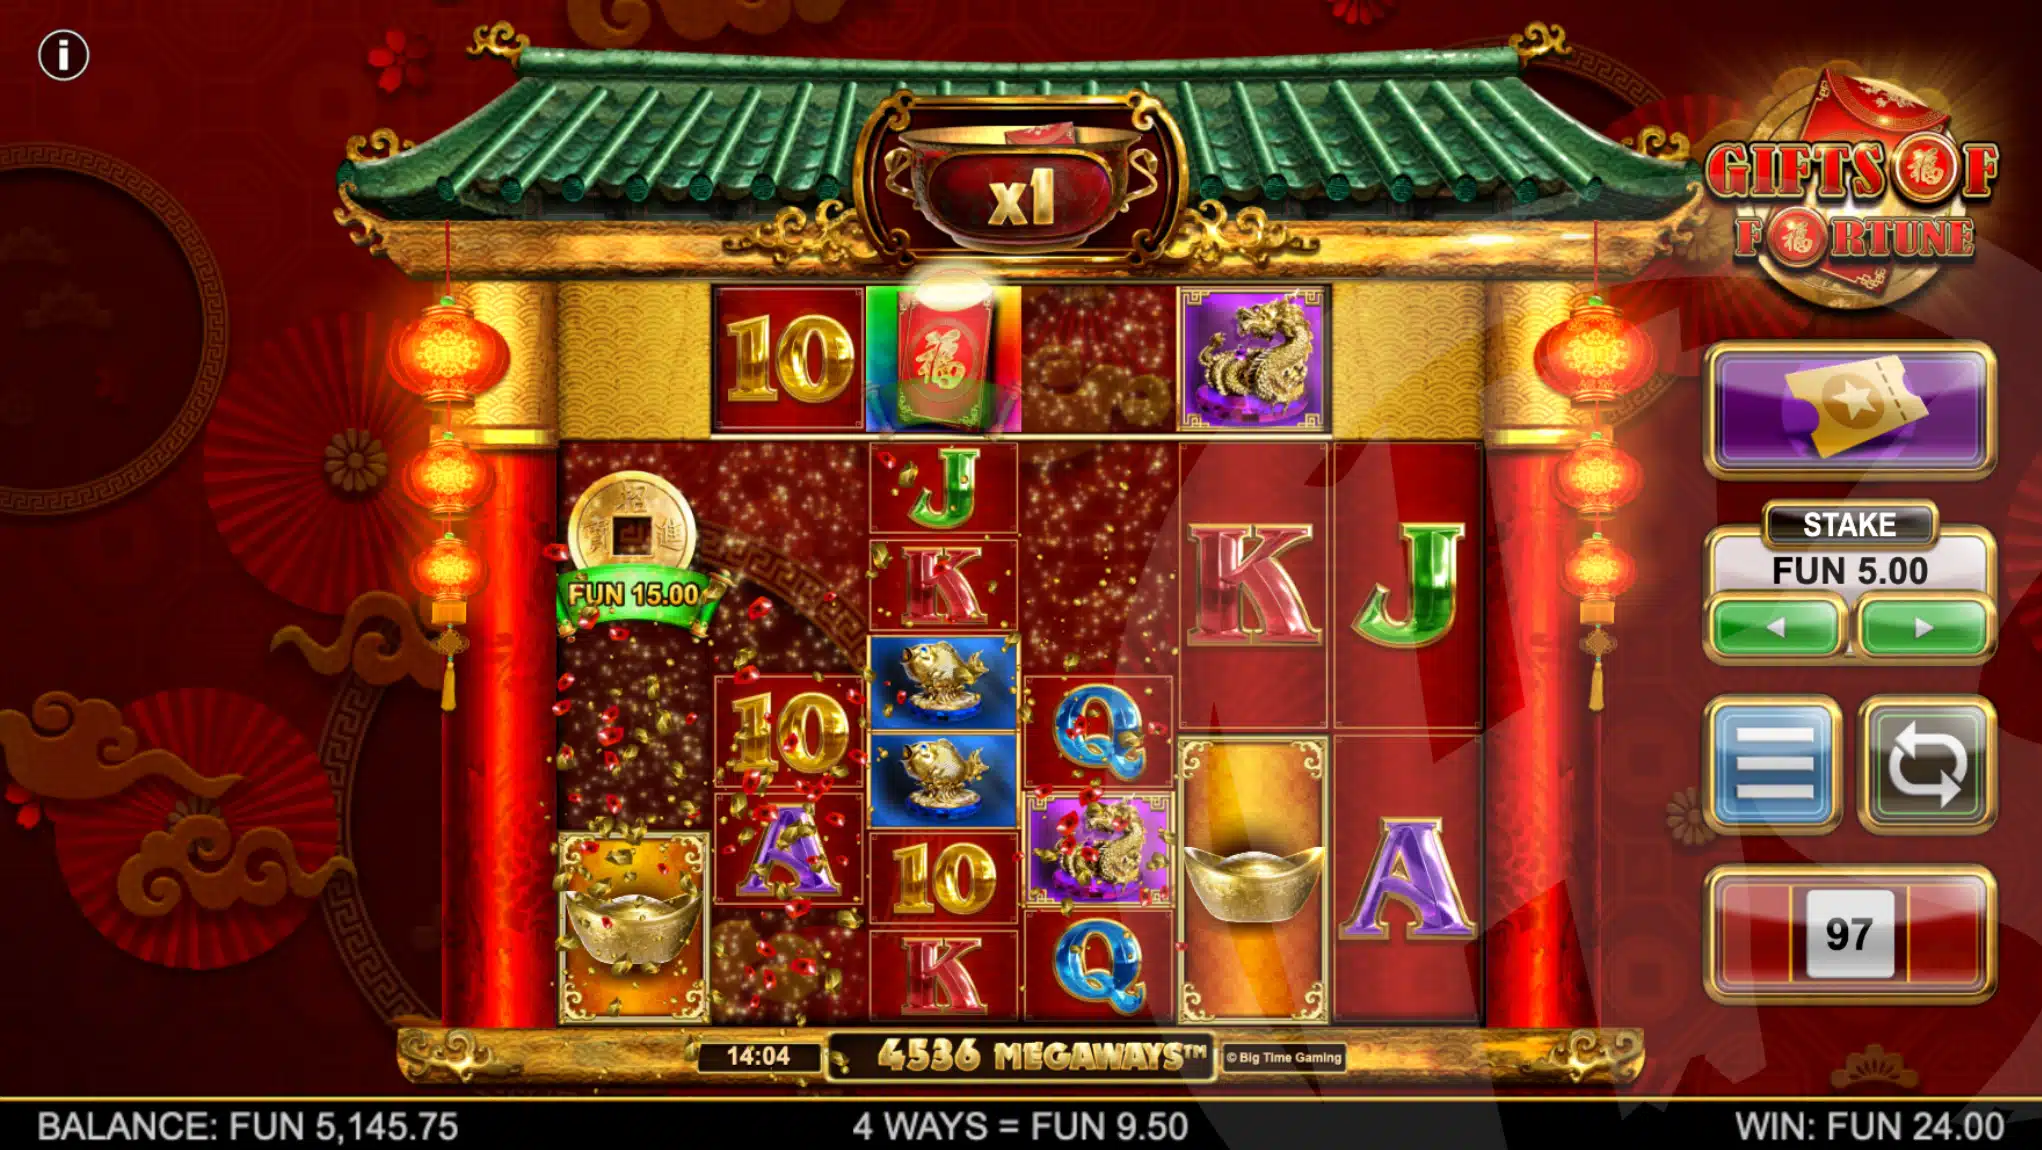 Winning Symbols are Removed From the Reels, Revealing Fortune Prizes